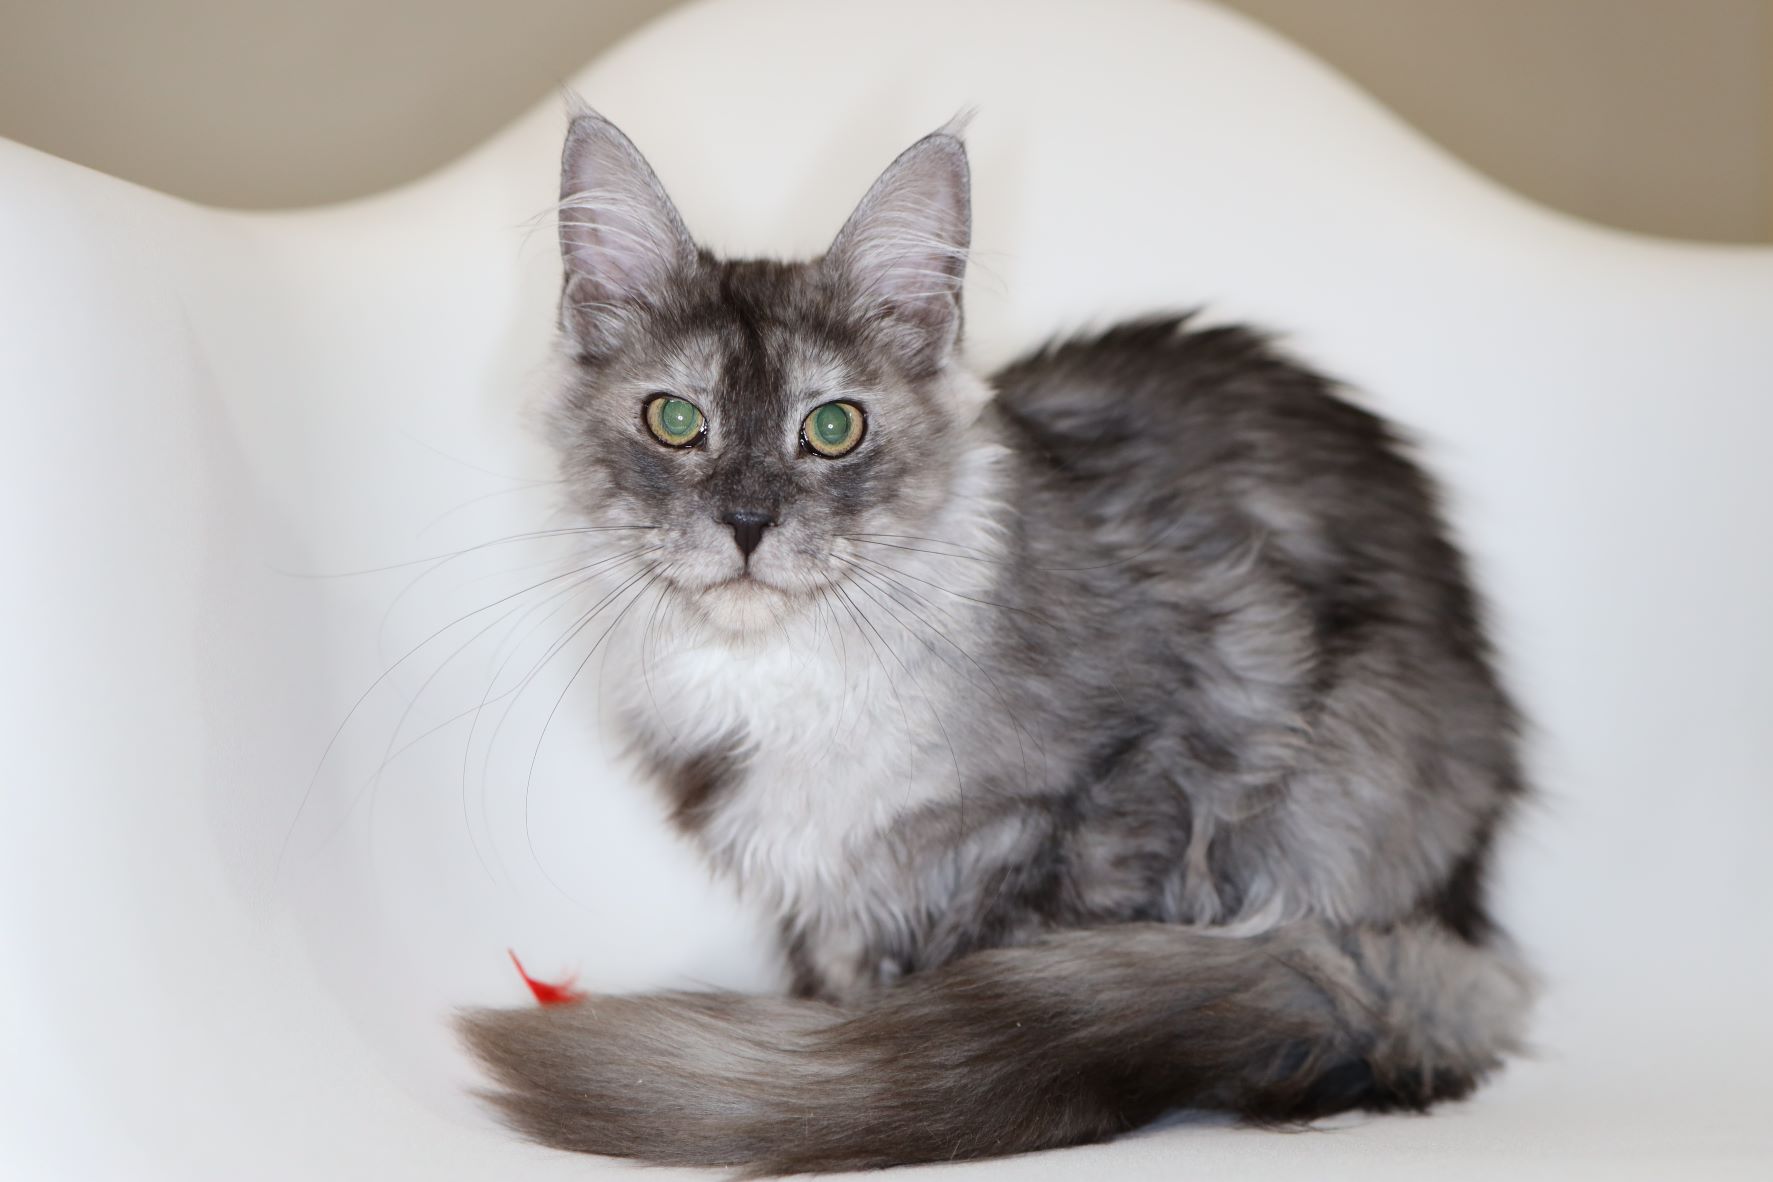 "Narobi" Pale Smoke Female European Maine Coon Kitten for sale   DOB 11/22/2021  Available